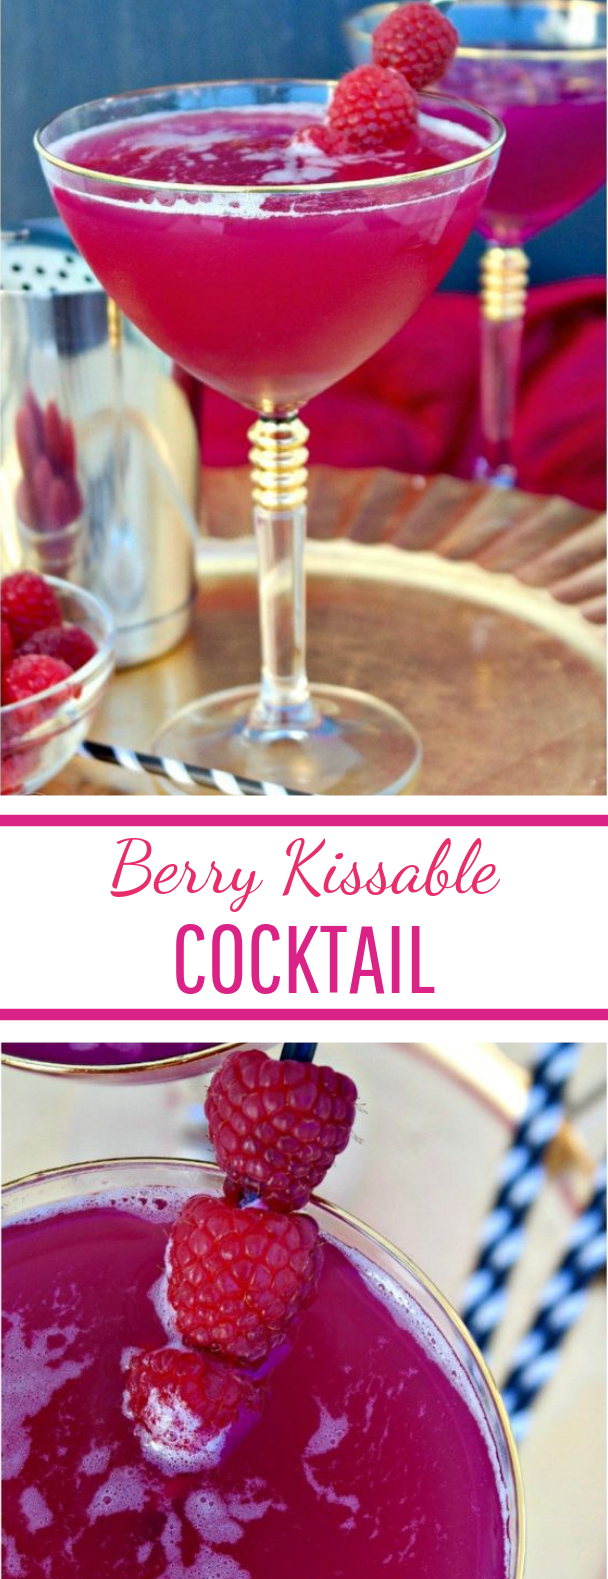 Berry Kissable Cocktail #valentine #drinks